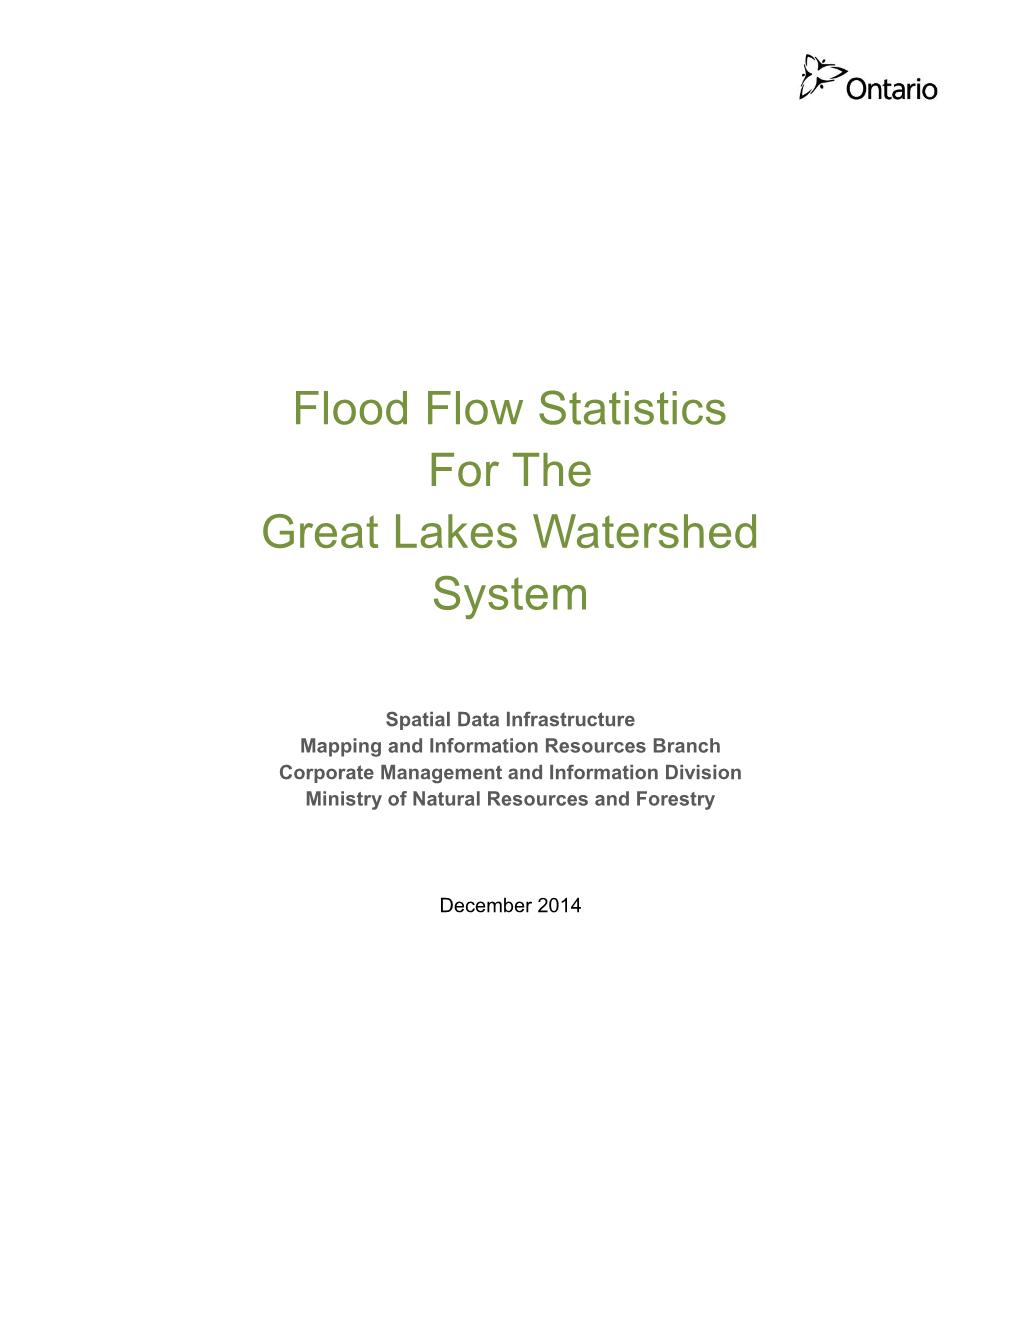 Flood Flow Statistics for the Great Lakes Watershed System